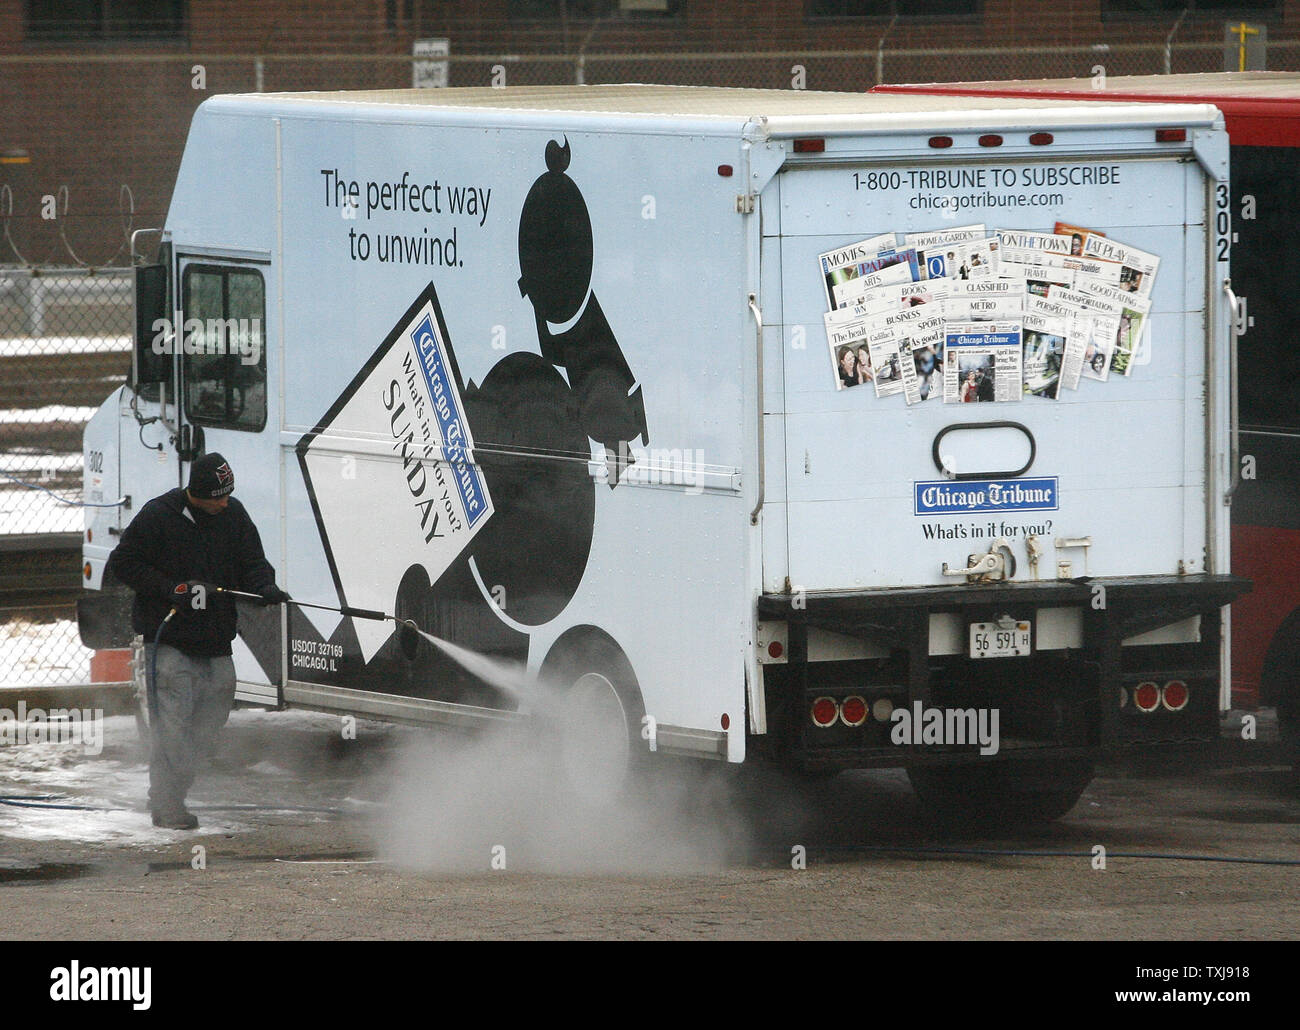 A worker washes a delivery truck at the Chicago Tribune's printing plant on December 8, 2008 in Chicago. The Tribune Company, which owns the Chicago Cubs baseball franchise, as well as the Los Angeles Times, Chicago Tribune, The Sun of Baltimore, The Hartford (Conn.) Courant, six other daily newspapers and 23 television stations, filed for bankruptcy protection Monday in a Delaware court.  (UPI Photo/Brian Kersey) Stock Photo